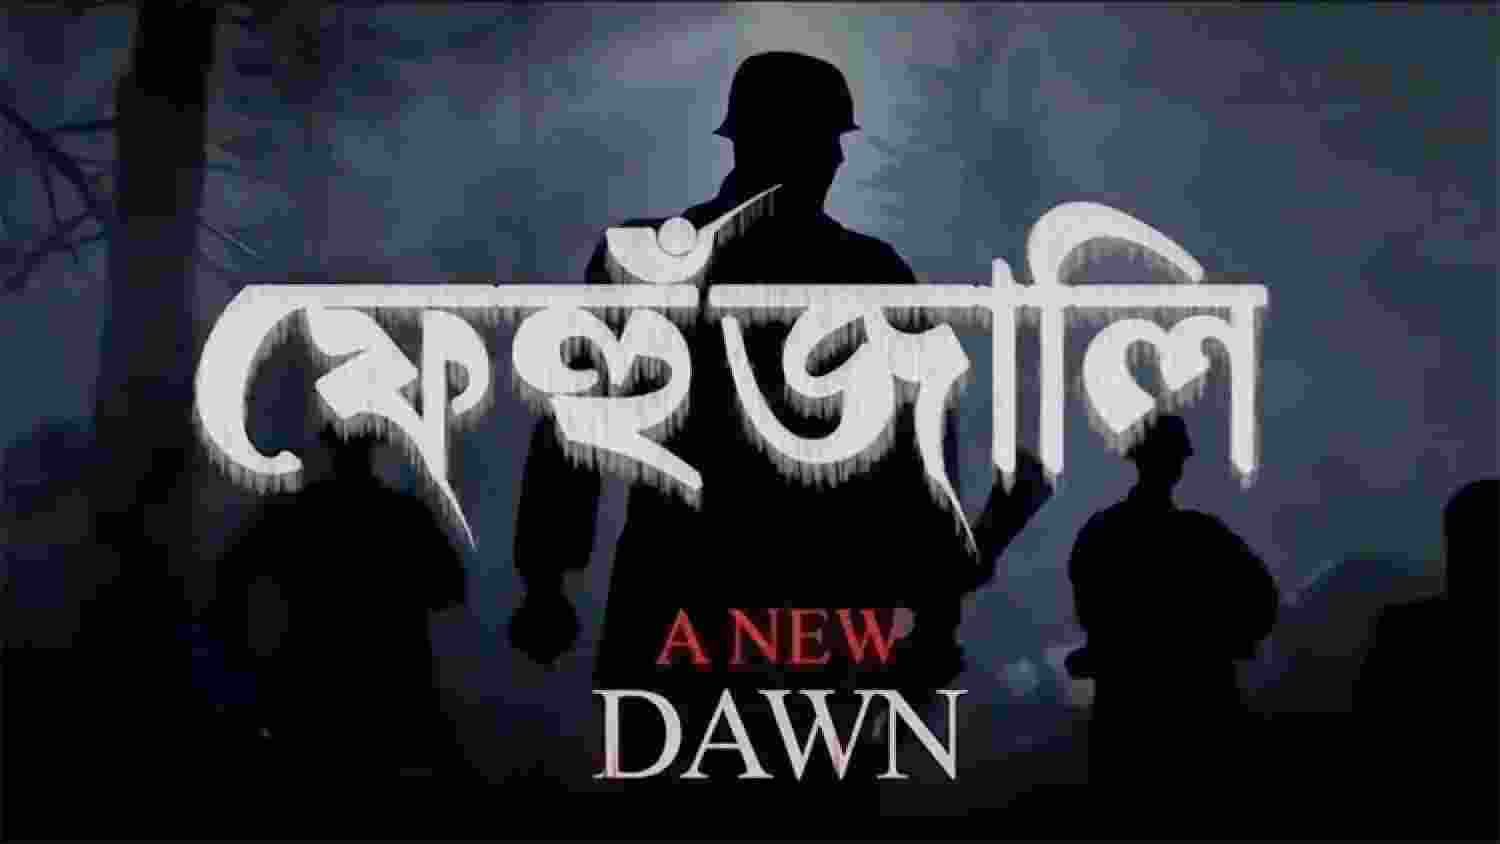 Assam Police film on extremism to screen at MIFF